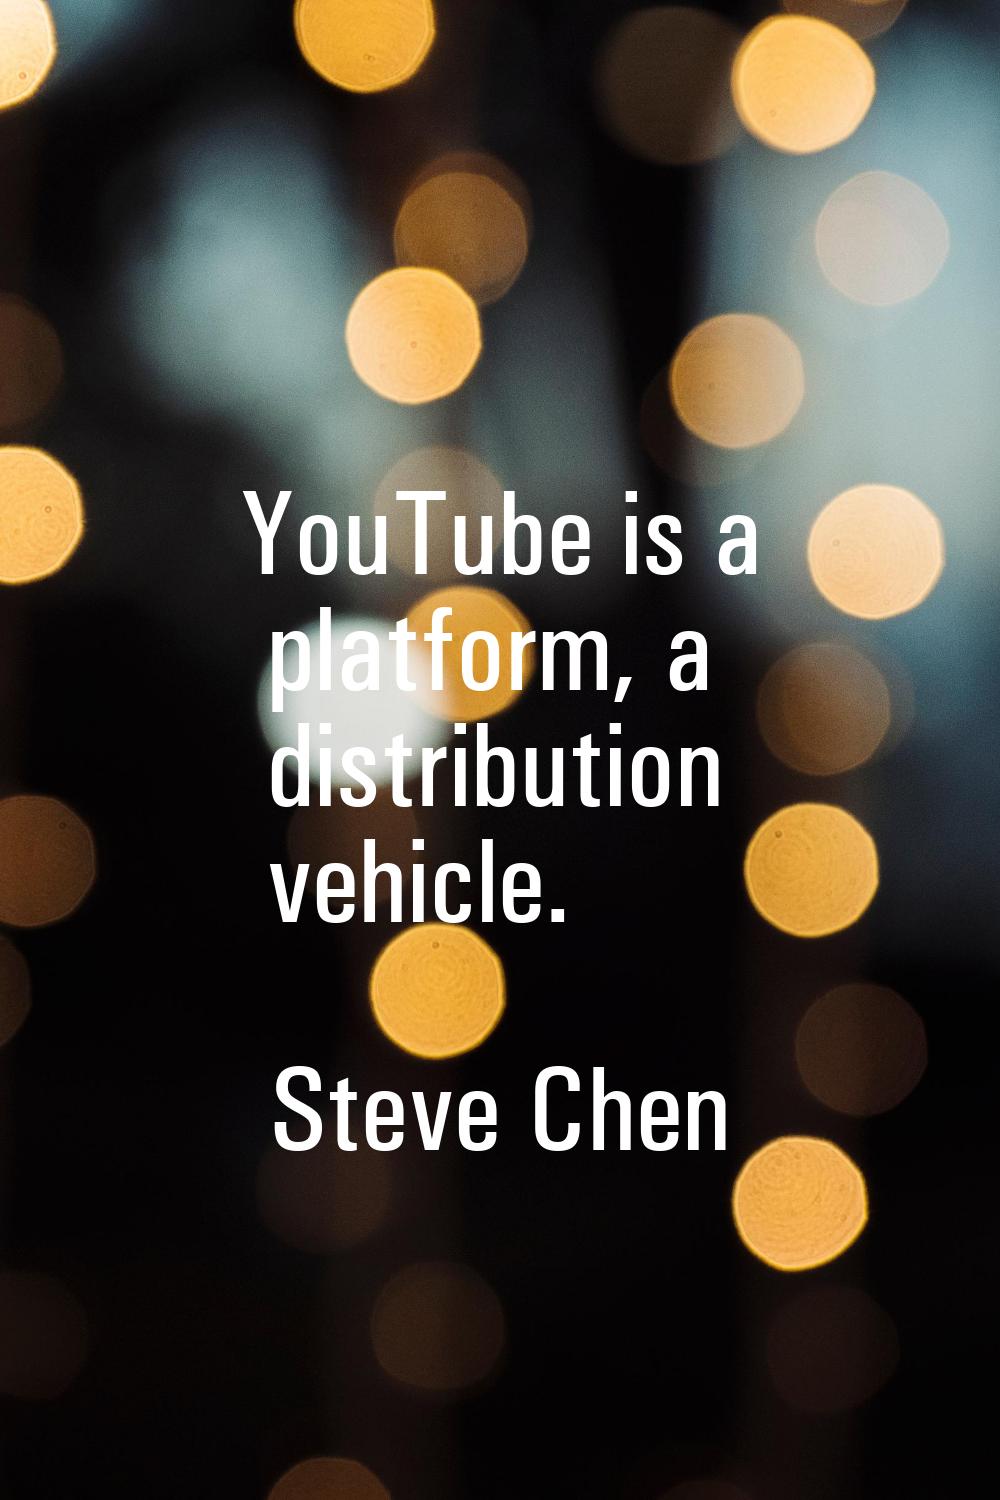 YouTube is a platform, a distribution vehicle.